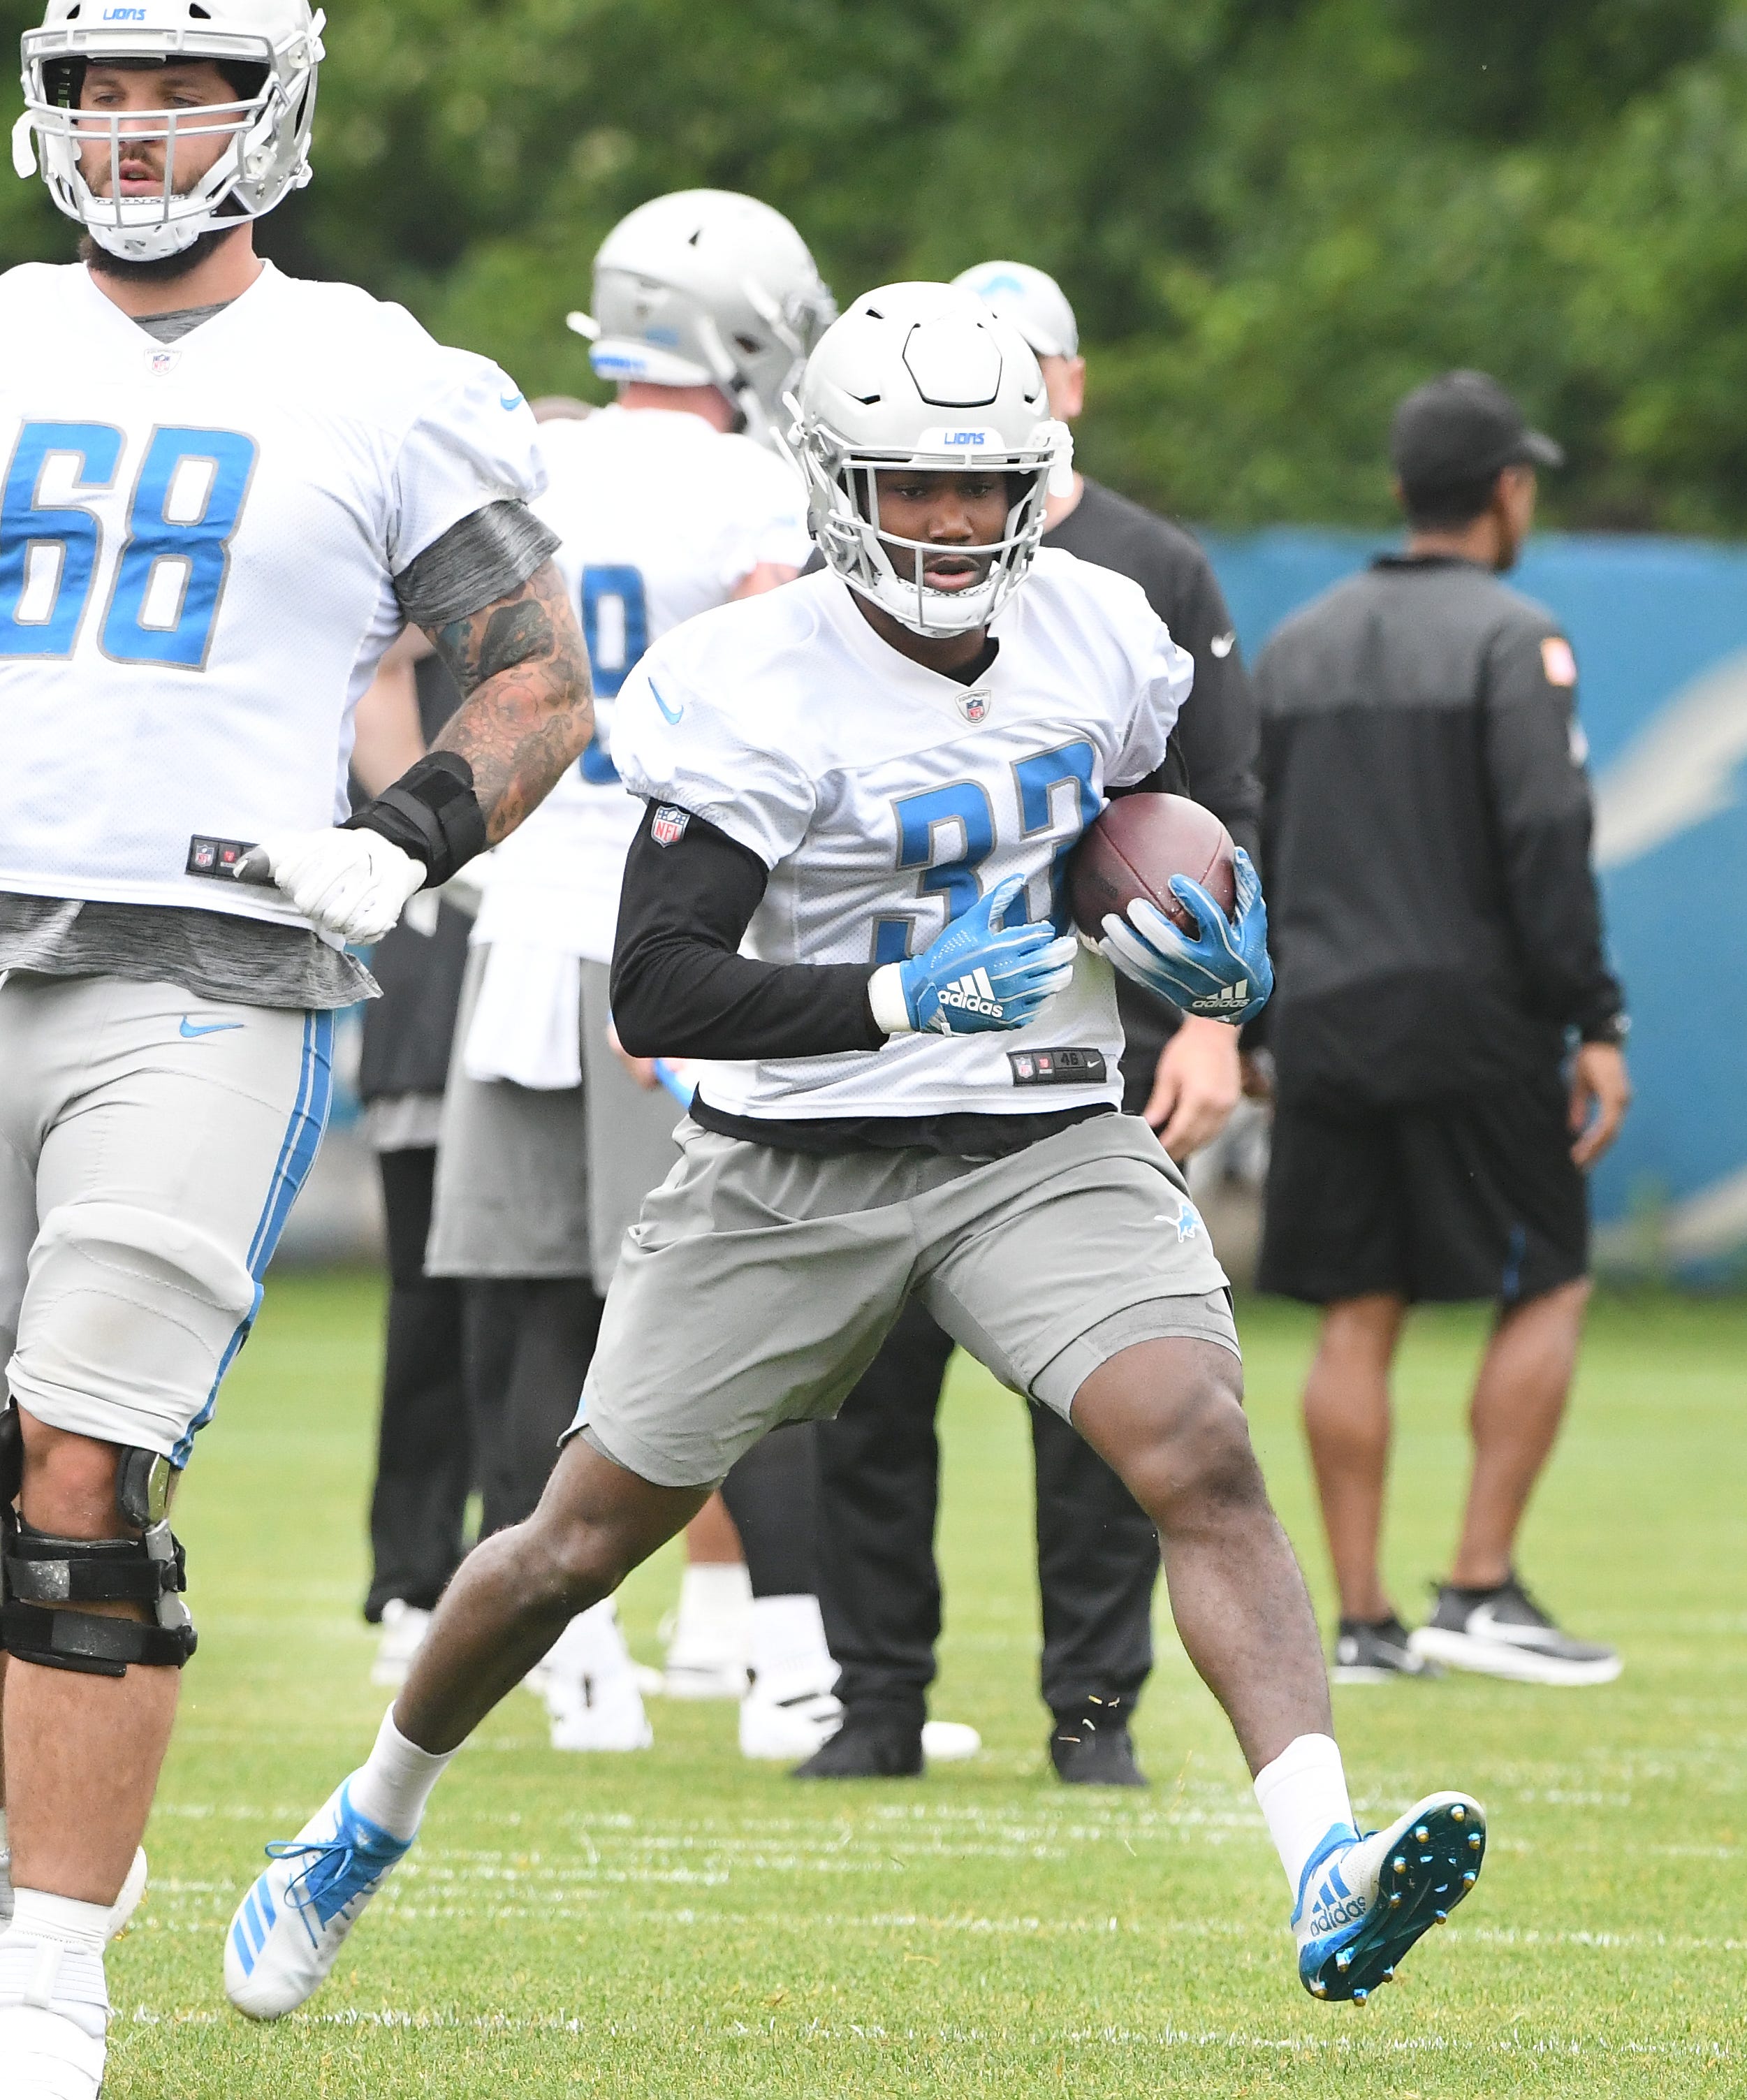 Lions running back Kerryon Johnson cuts from behind lineman Taylor Decker during drills.